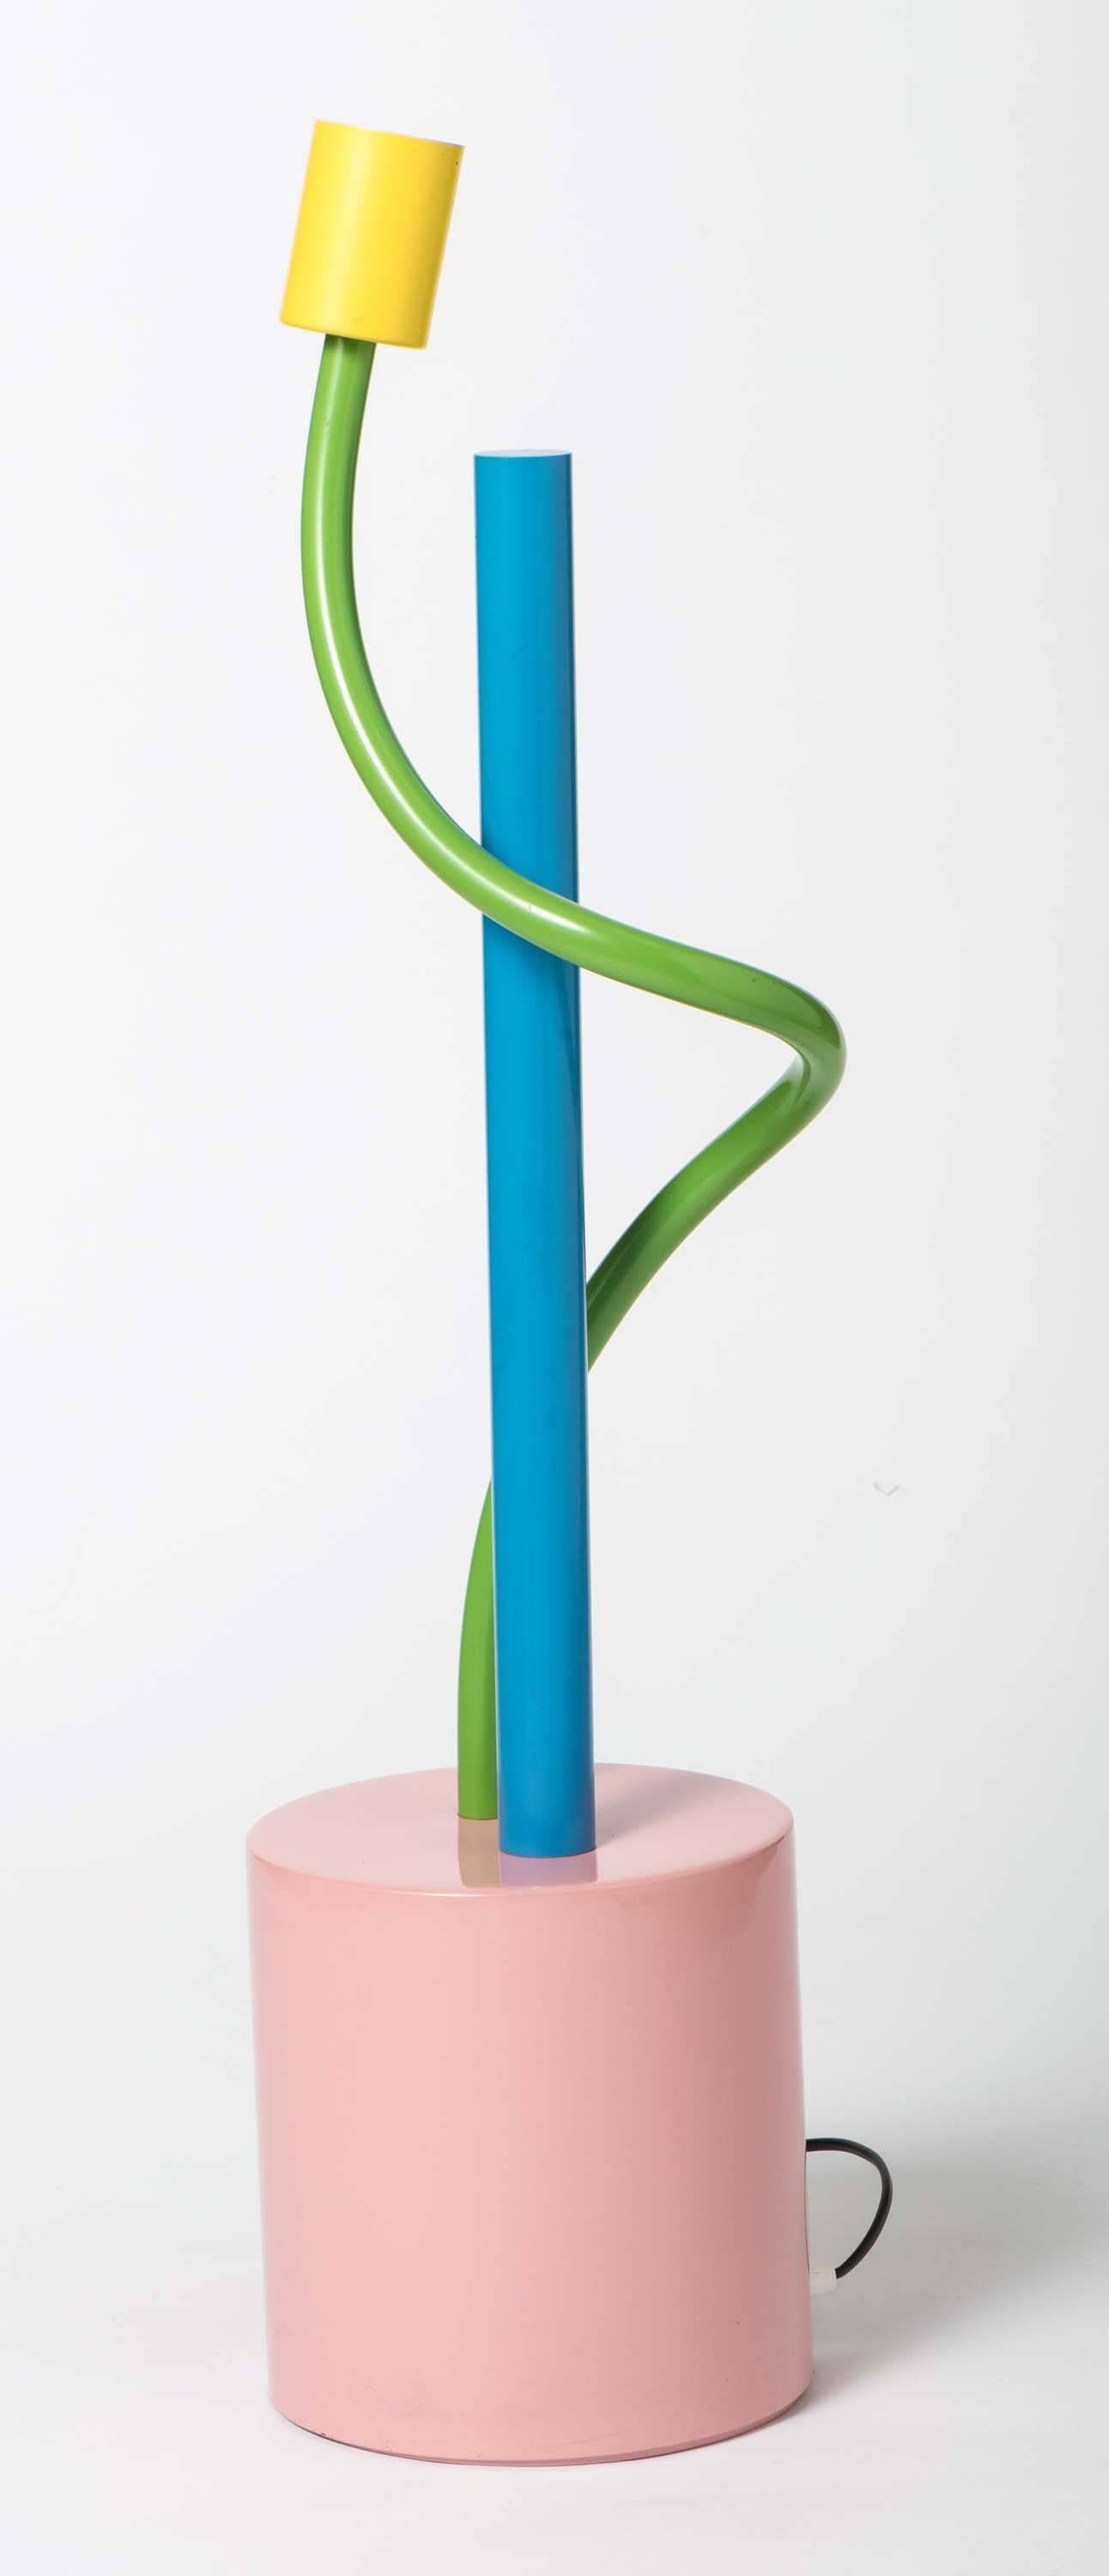 A Sinerpica lamp by Michele de Lucchi.
Painted metal.
Mark to base and numbered 278,
Italy, circa 1978.
Measures: 78 cm high x 17 cm diameter.
Lit; Alchima No. 28; 100 lights, p302
Radice “Memphis”p20.
        